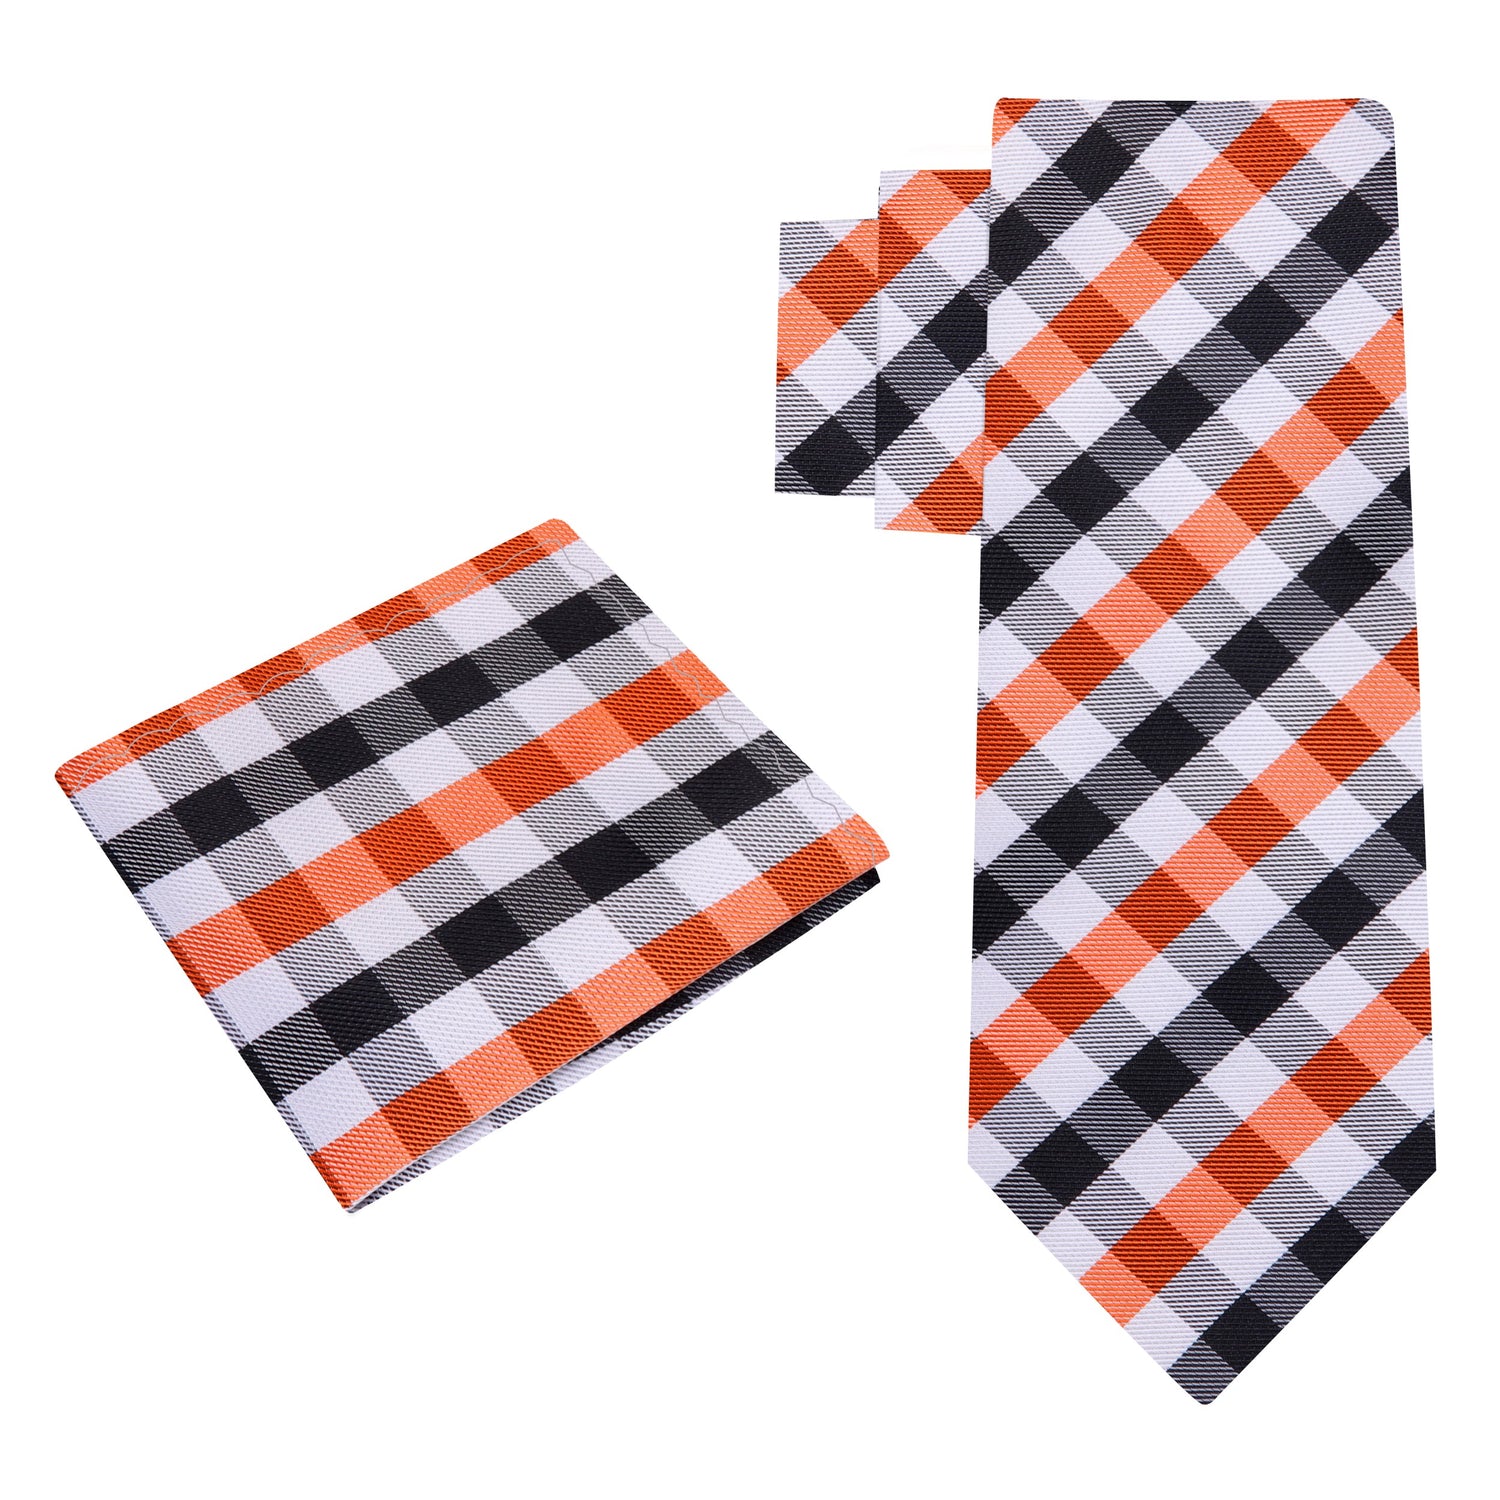 Alt View: A Red, White, Blue Geometric Check Pattern Silk Necktie, Matching Pocket Square